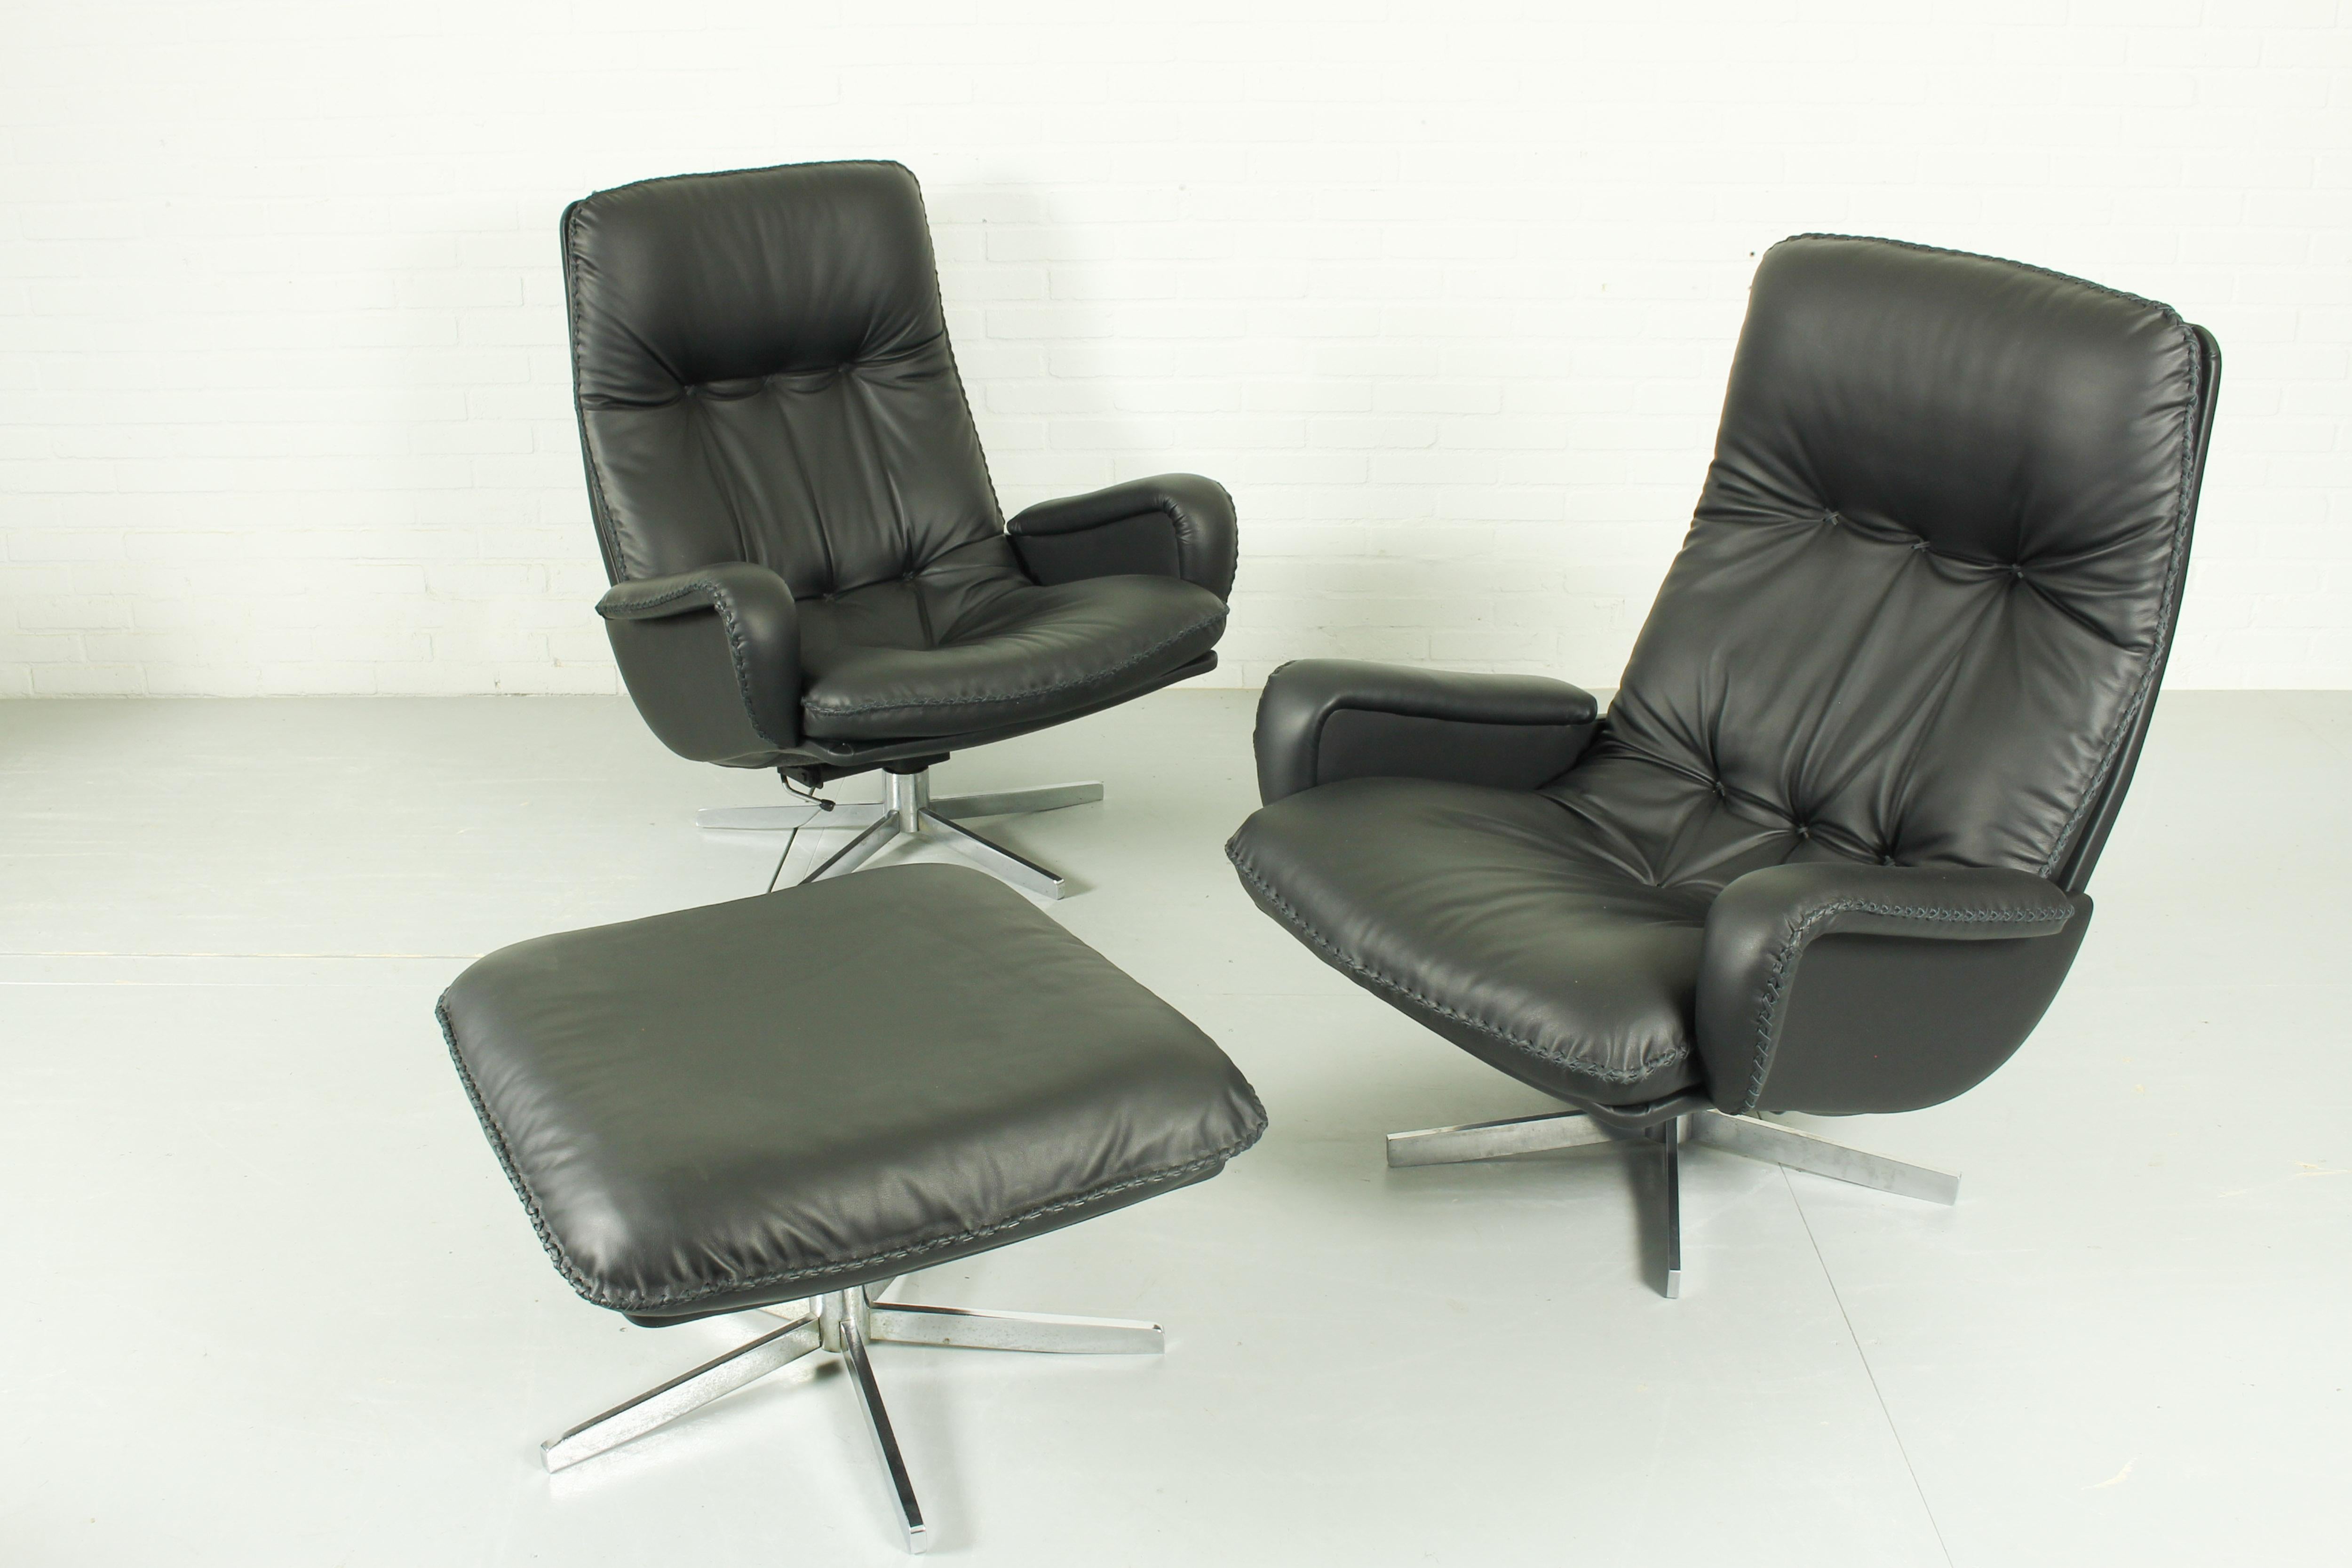 DS231 James Bond highback swivel chairs and matching ottoman by de Sede Switzerl In Excellent Condition For Sale In Appeltern, Gelderland